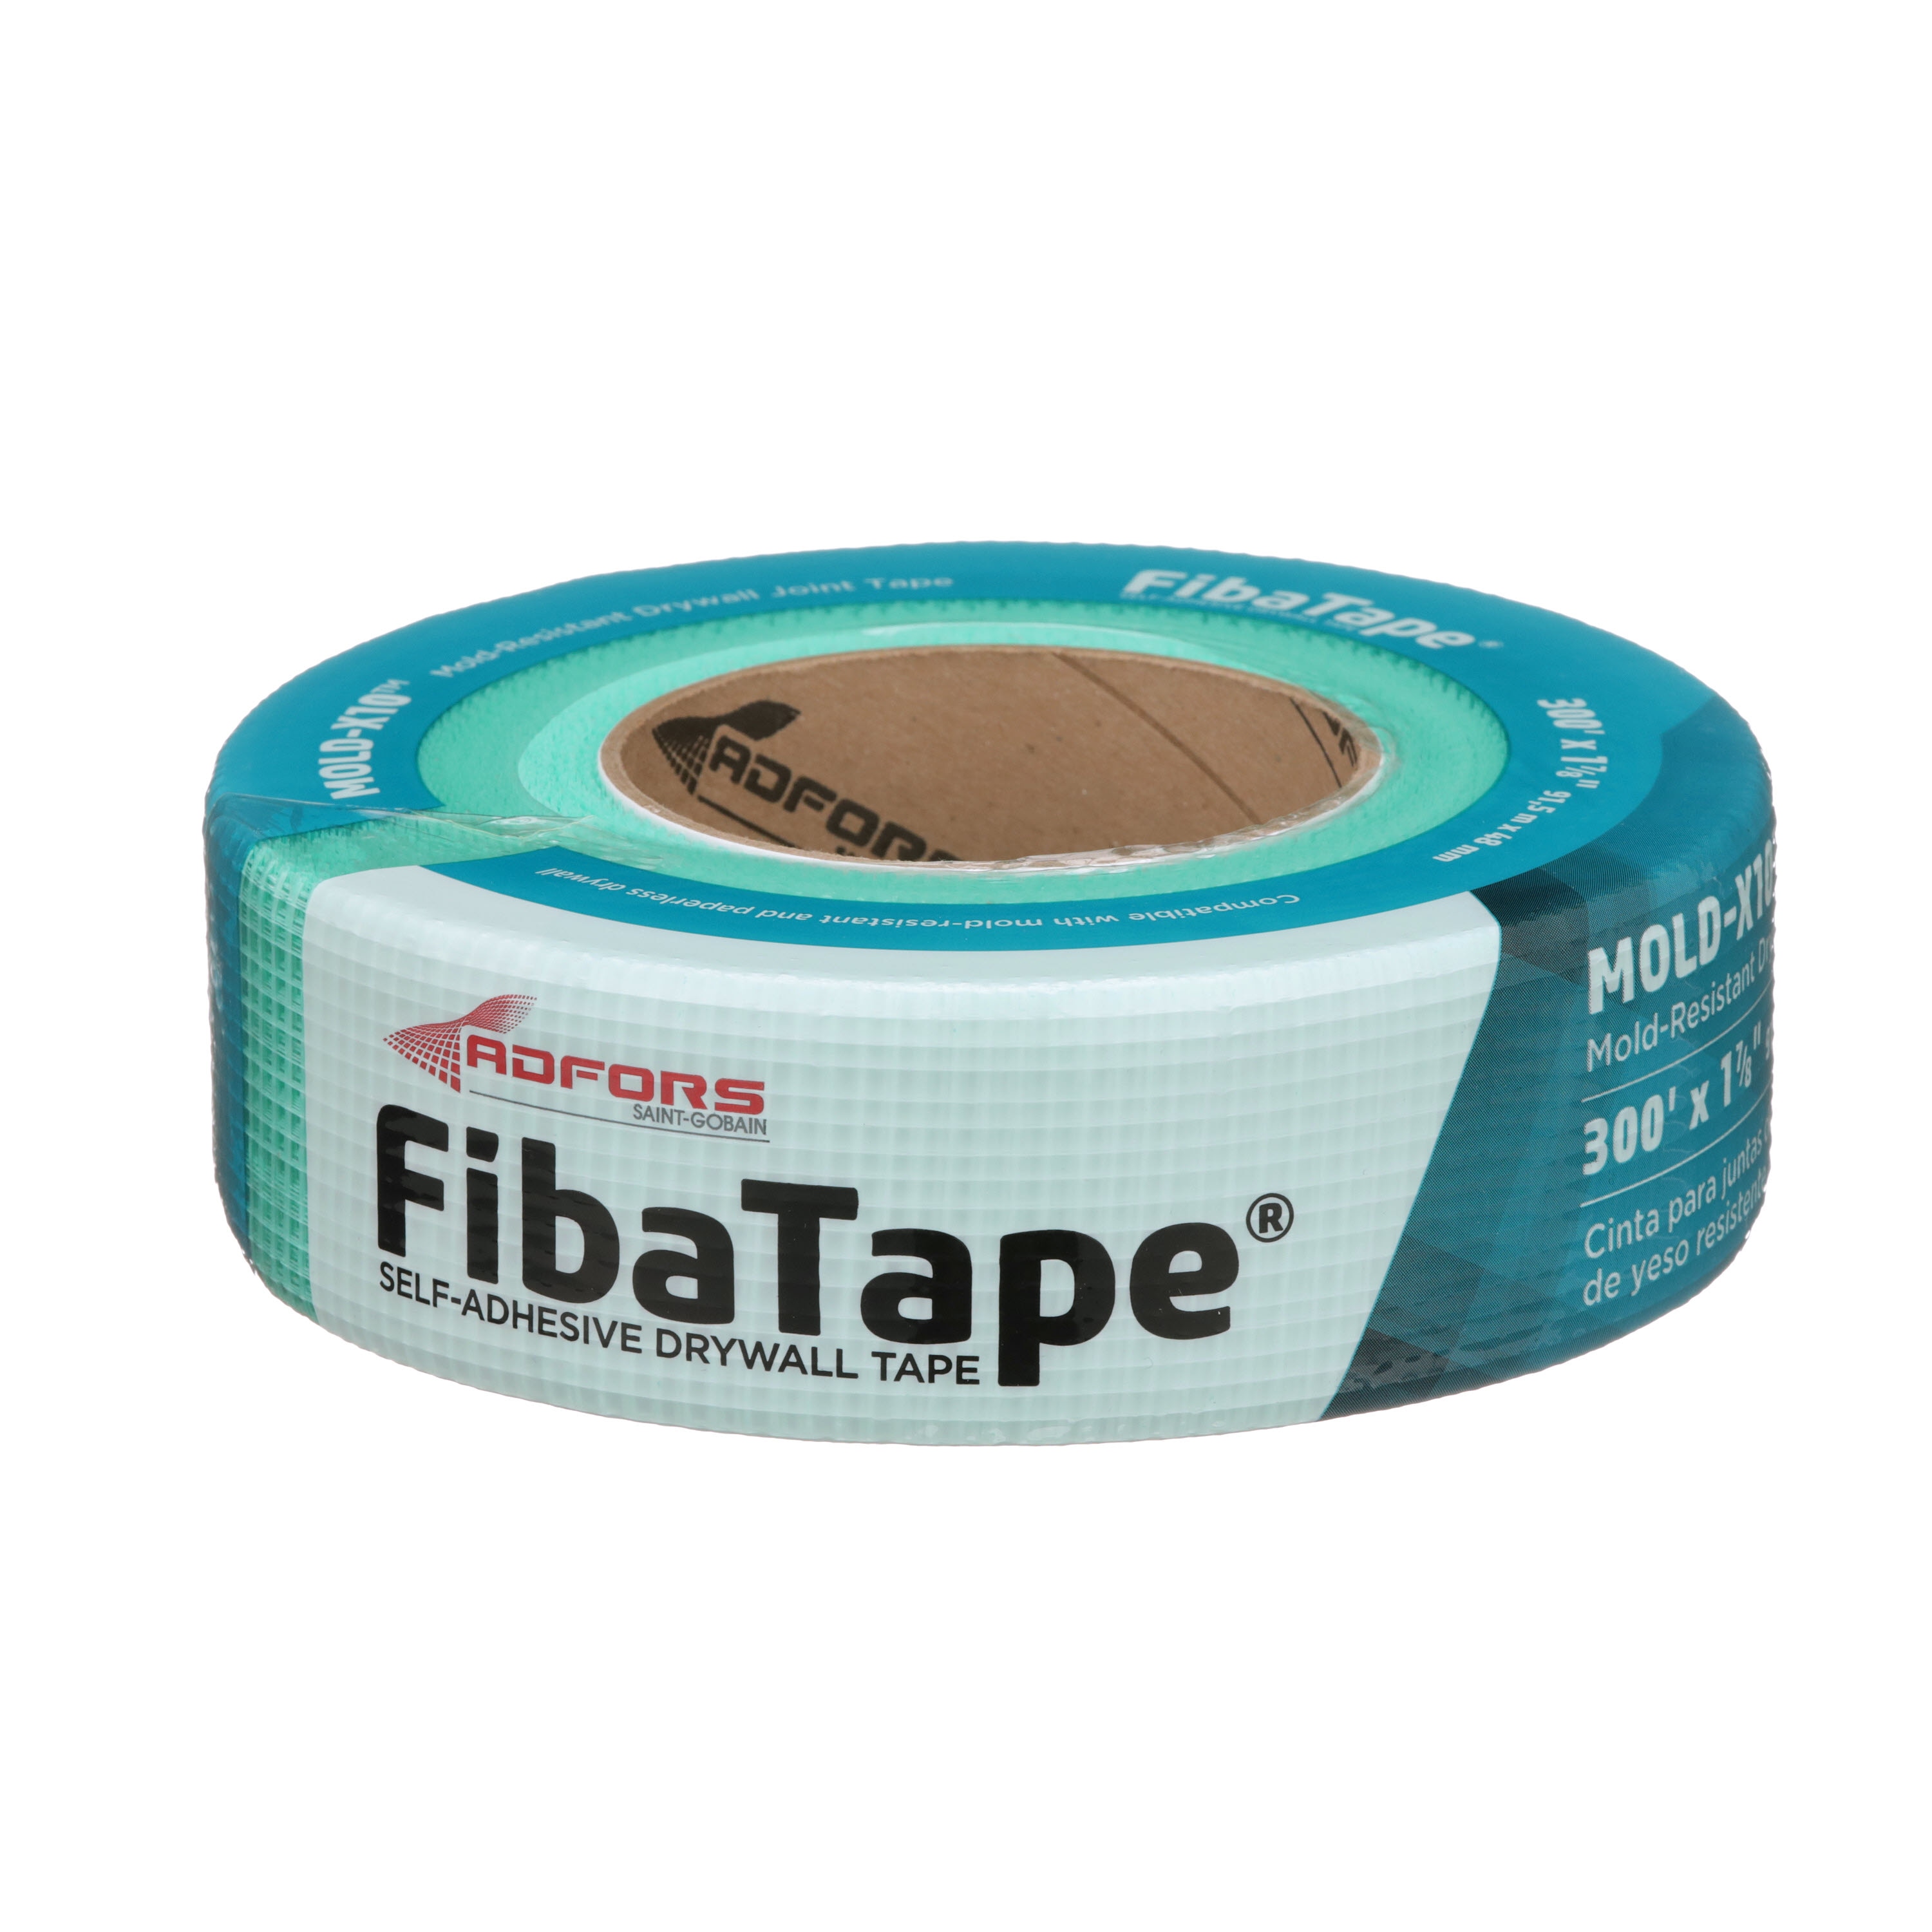 This tape is made of fabric with an adhesive at its back. The mix